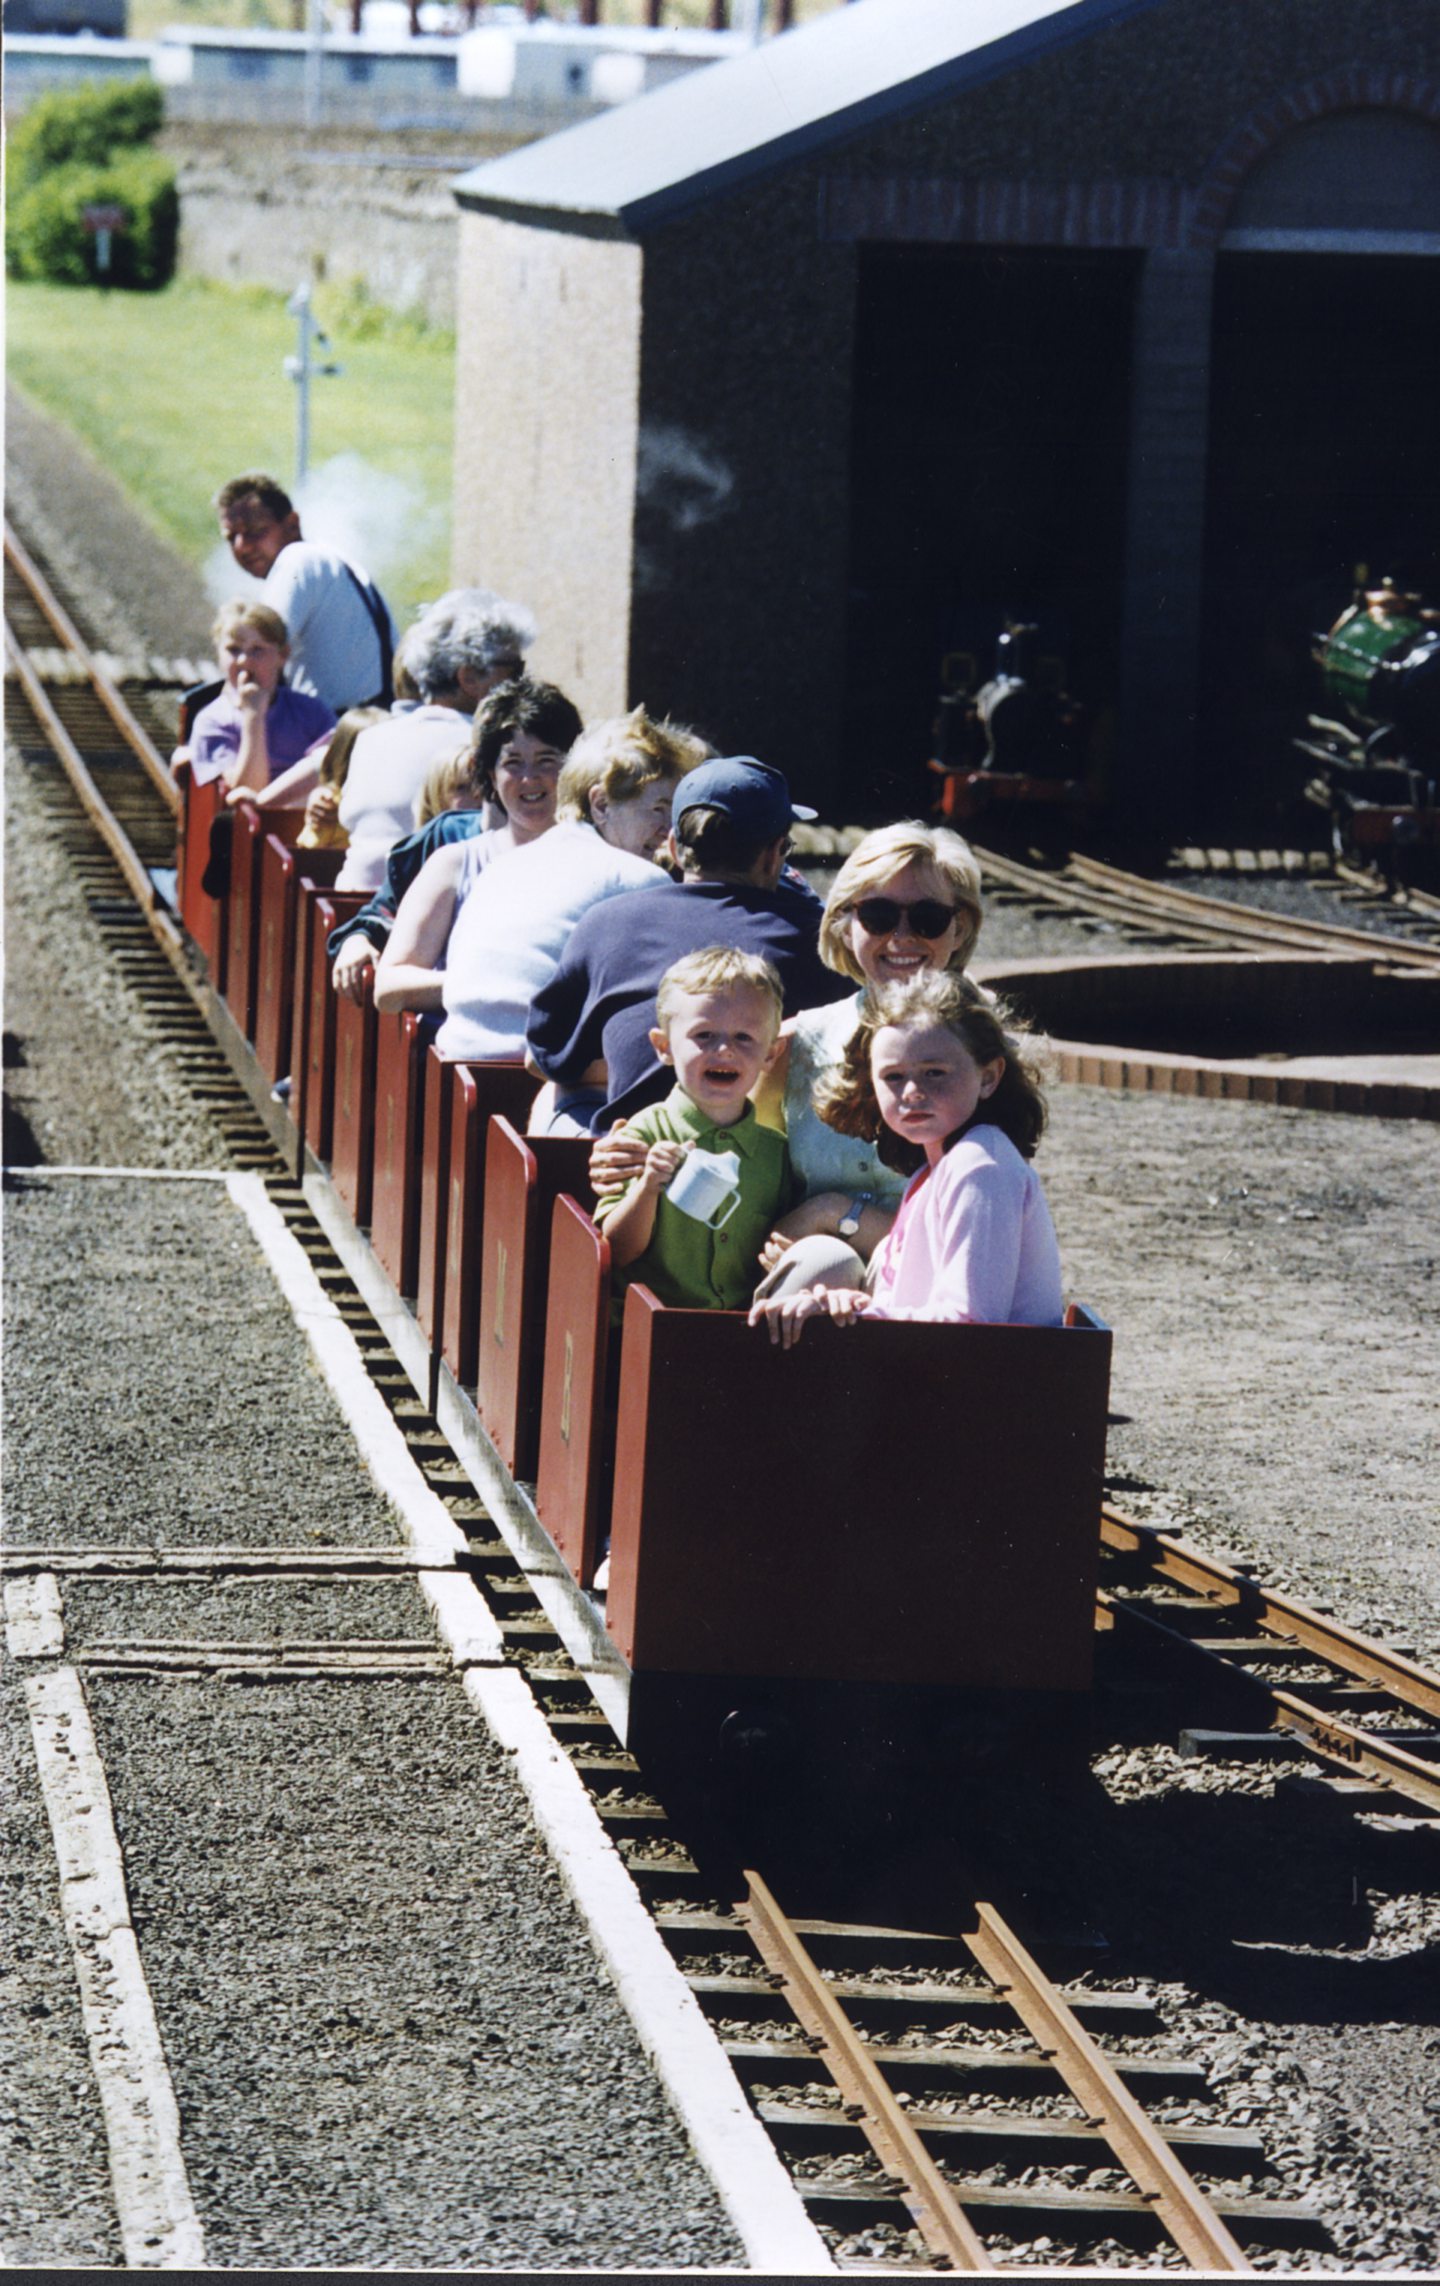 Another happy scene as holidaymakers enjoy a summer ride on Kerr's miniature railway. Image: DC Thomson.